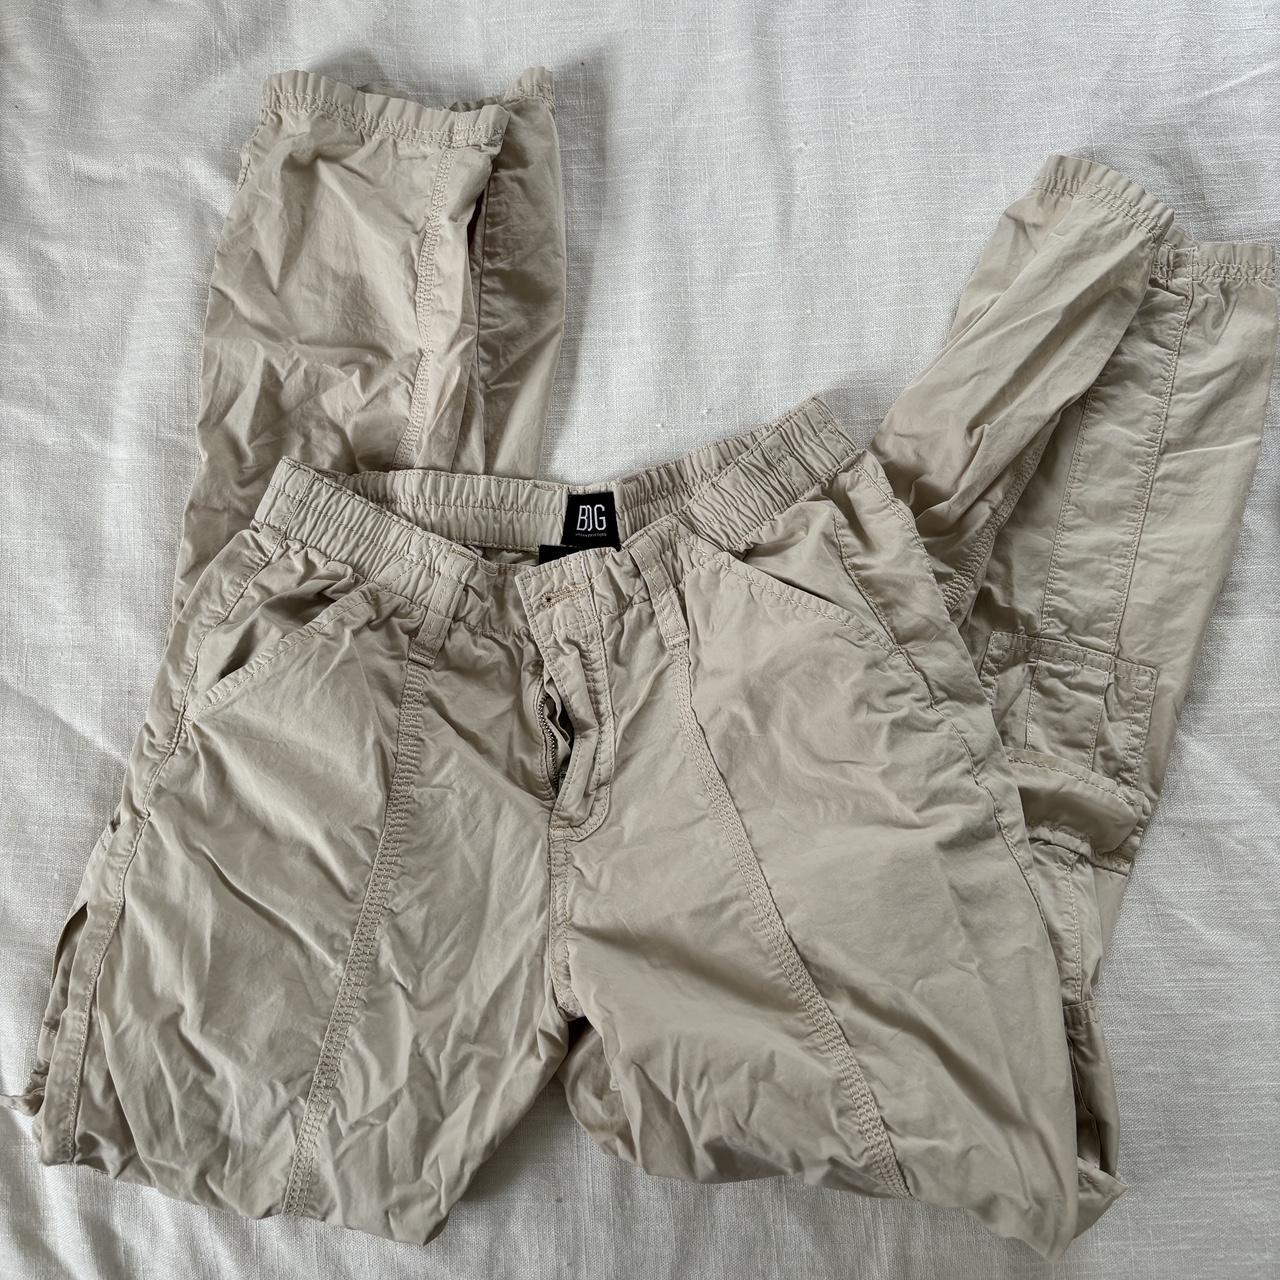 TAN CARGO PANTS elastic waist band/mid to low rise - Depop